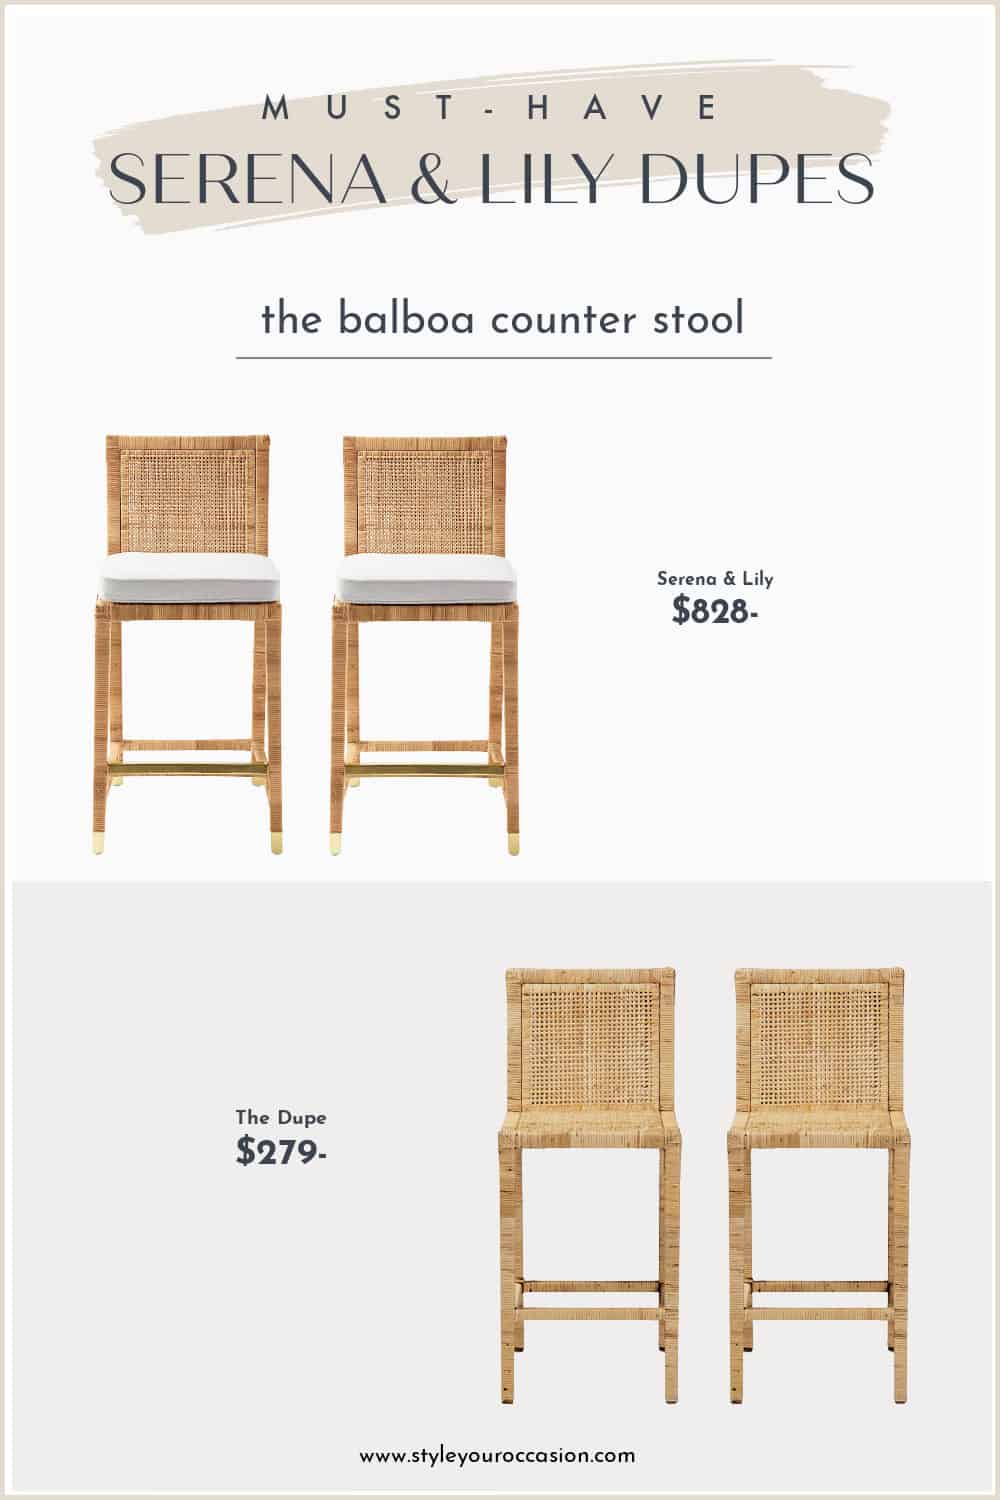 image comparing two natural rattan counter stools, one Serena and Lily dupe and the original stool